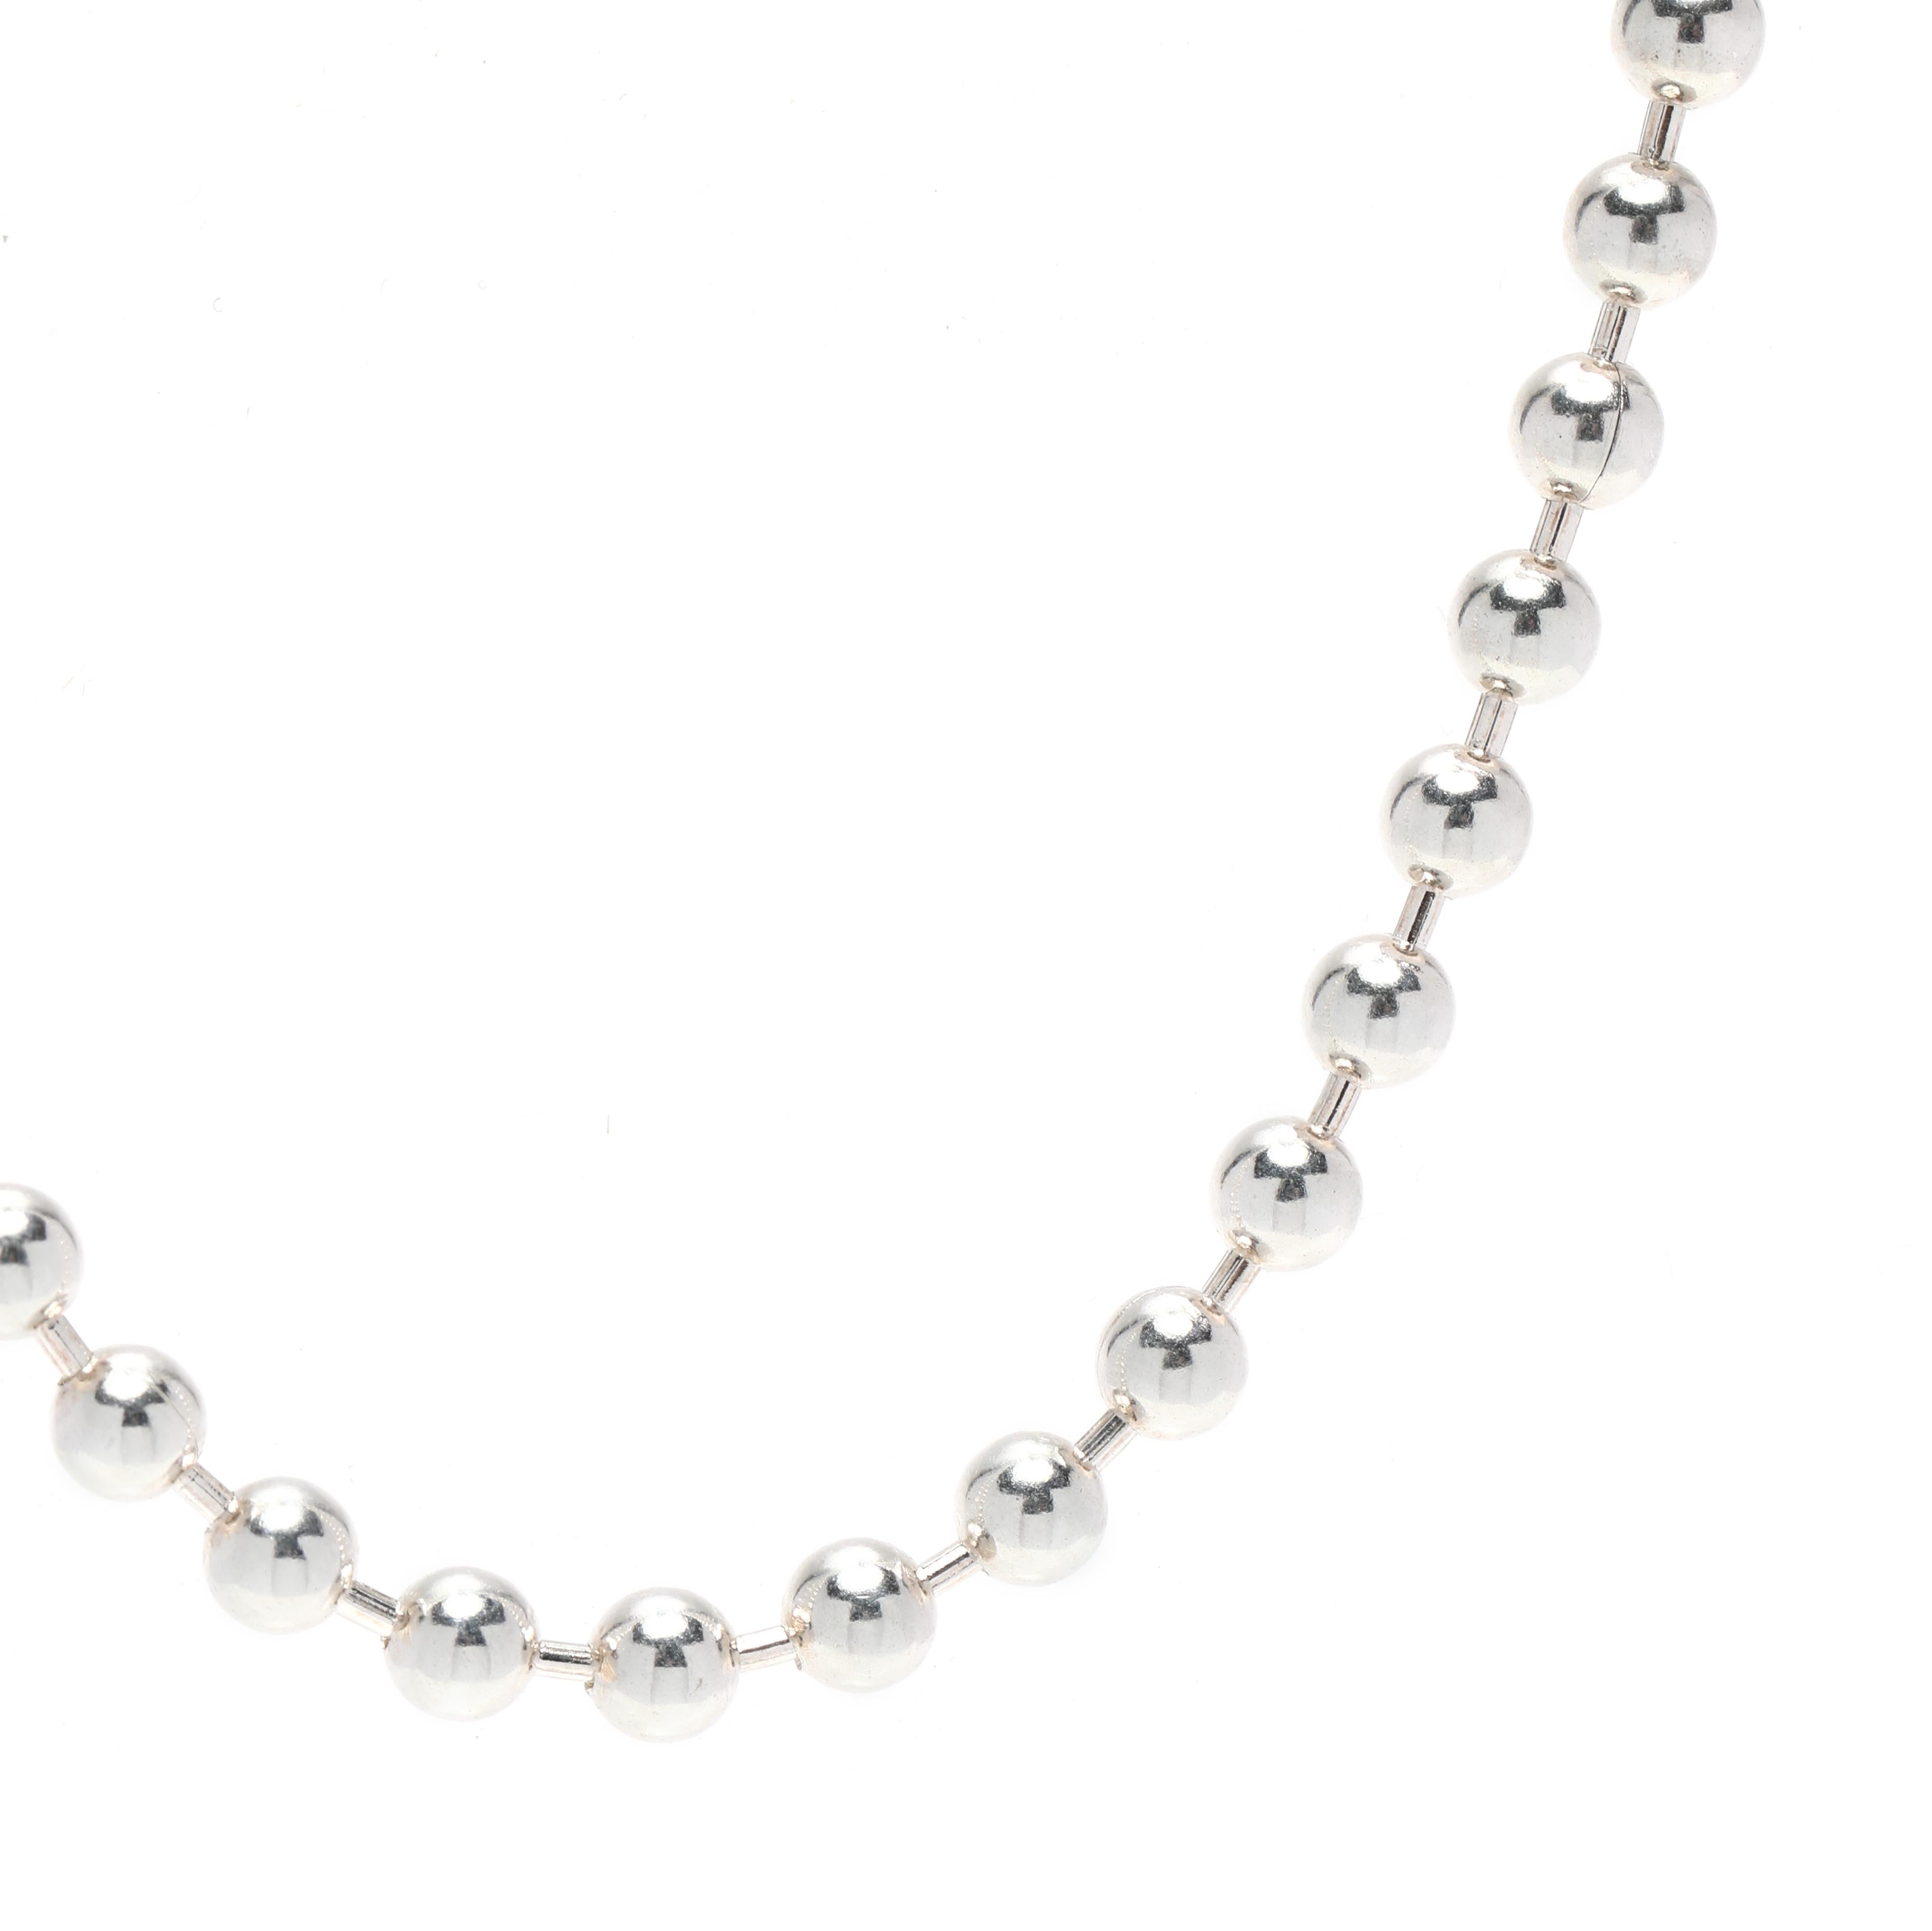 This Mexican medium bead chain necklace is the perfect statement piece for any outfit. Handcrafted from sterling silver, the necklace measures 21.5 inches in length and features a series of silver beaded chain links. The intricate design and